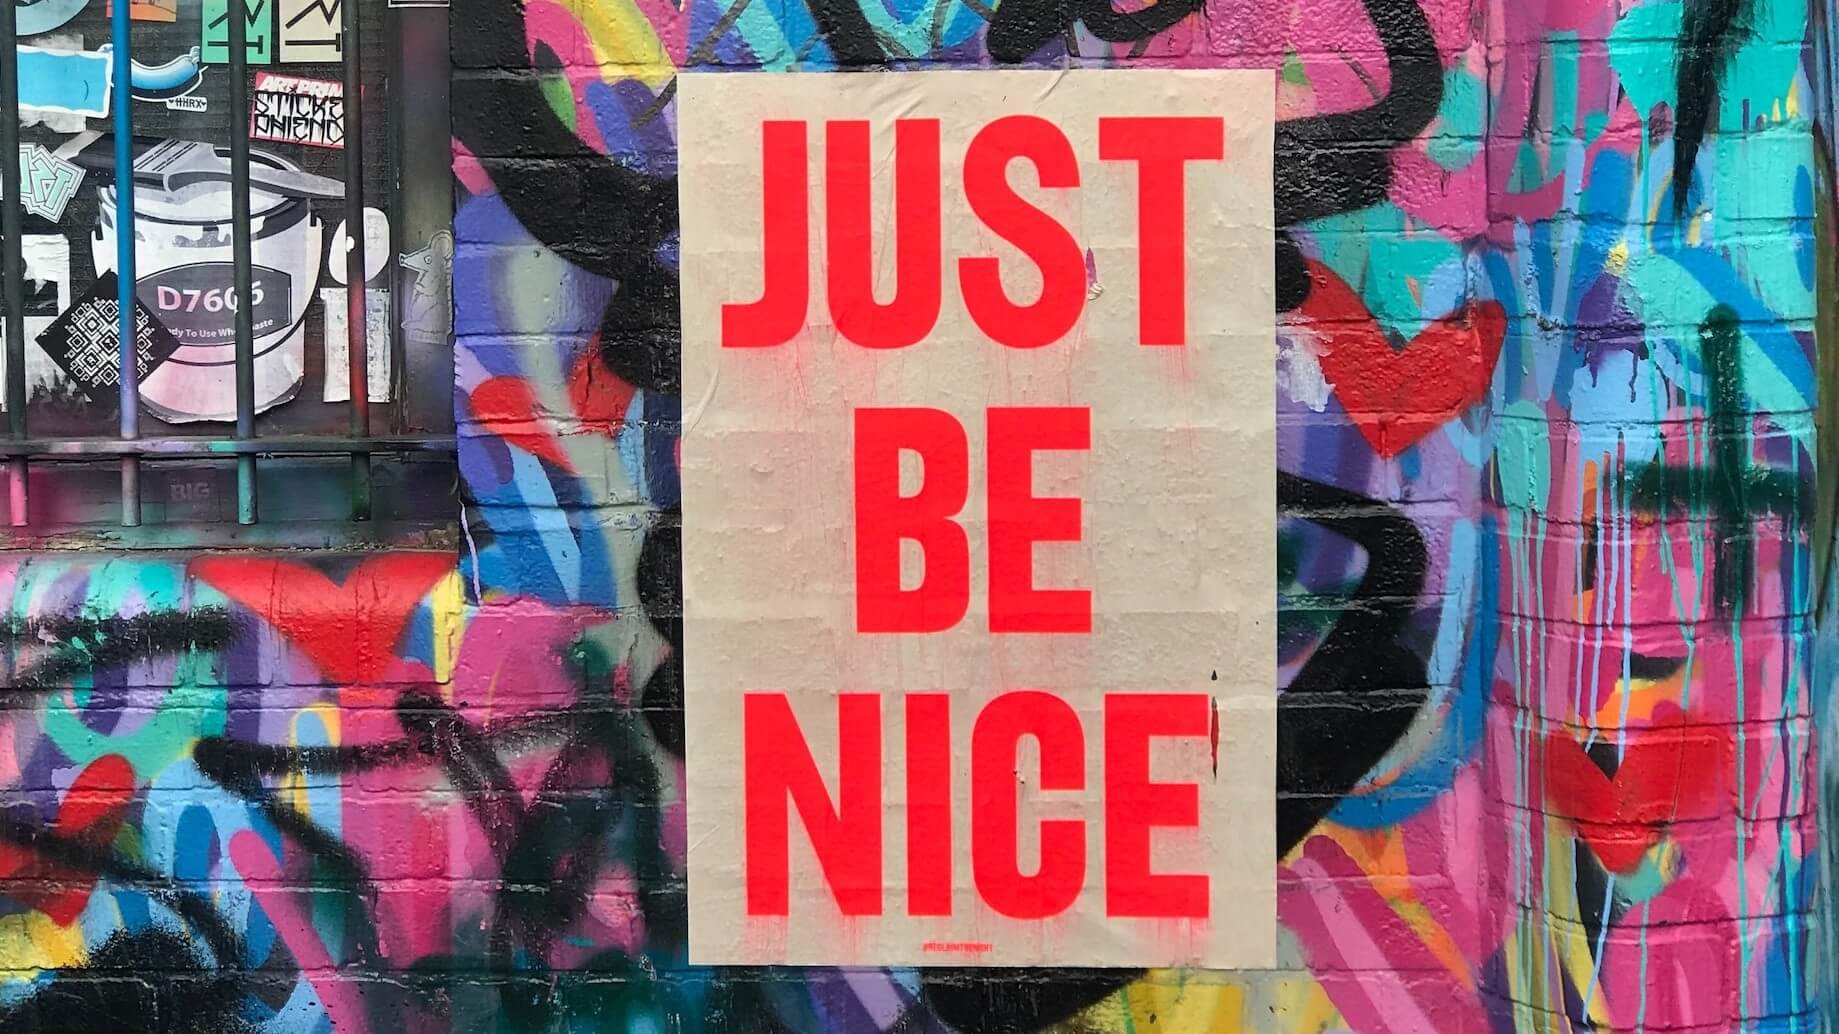 Poster with the message "Just be nice," promoting a culture of kindness